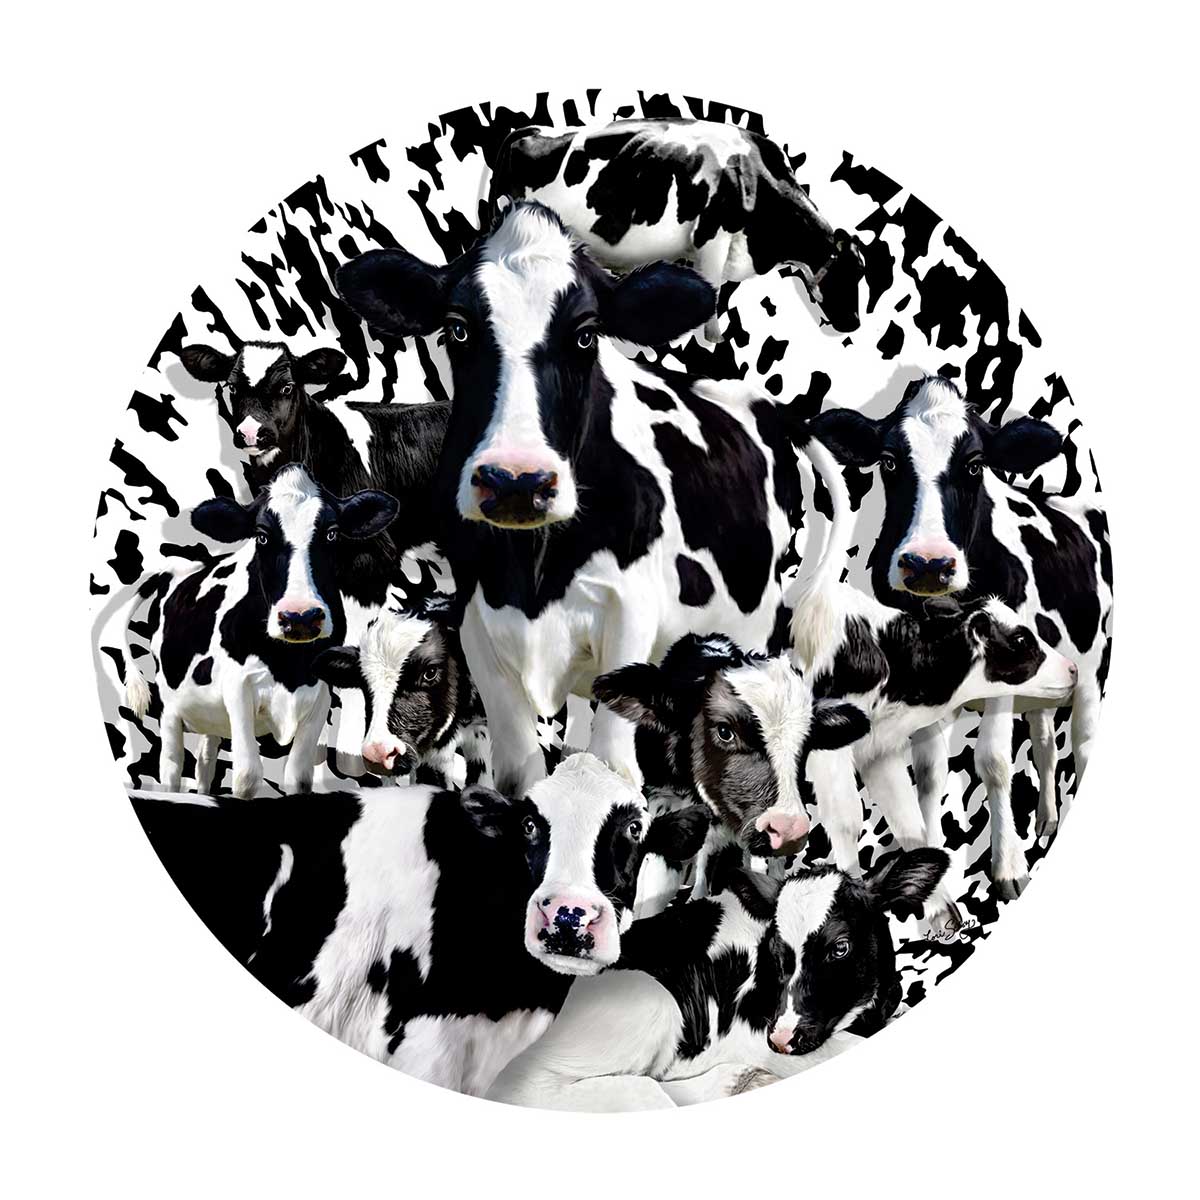 Herd of Cows Farm Animal Round Jigsaw Puzzle